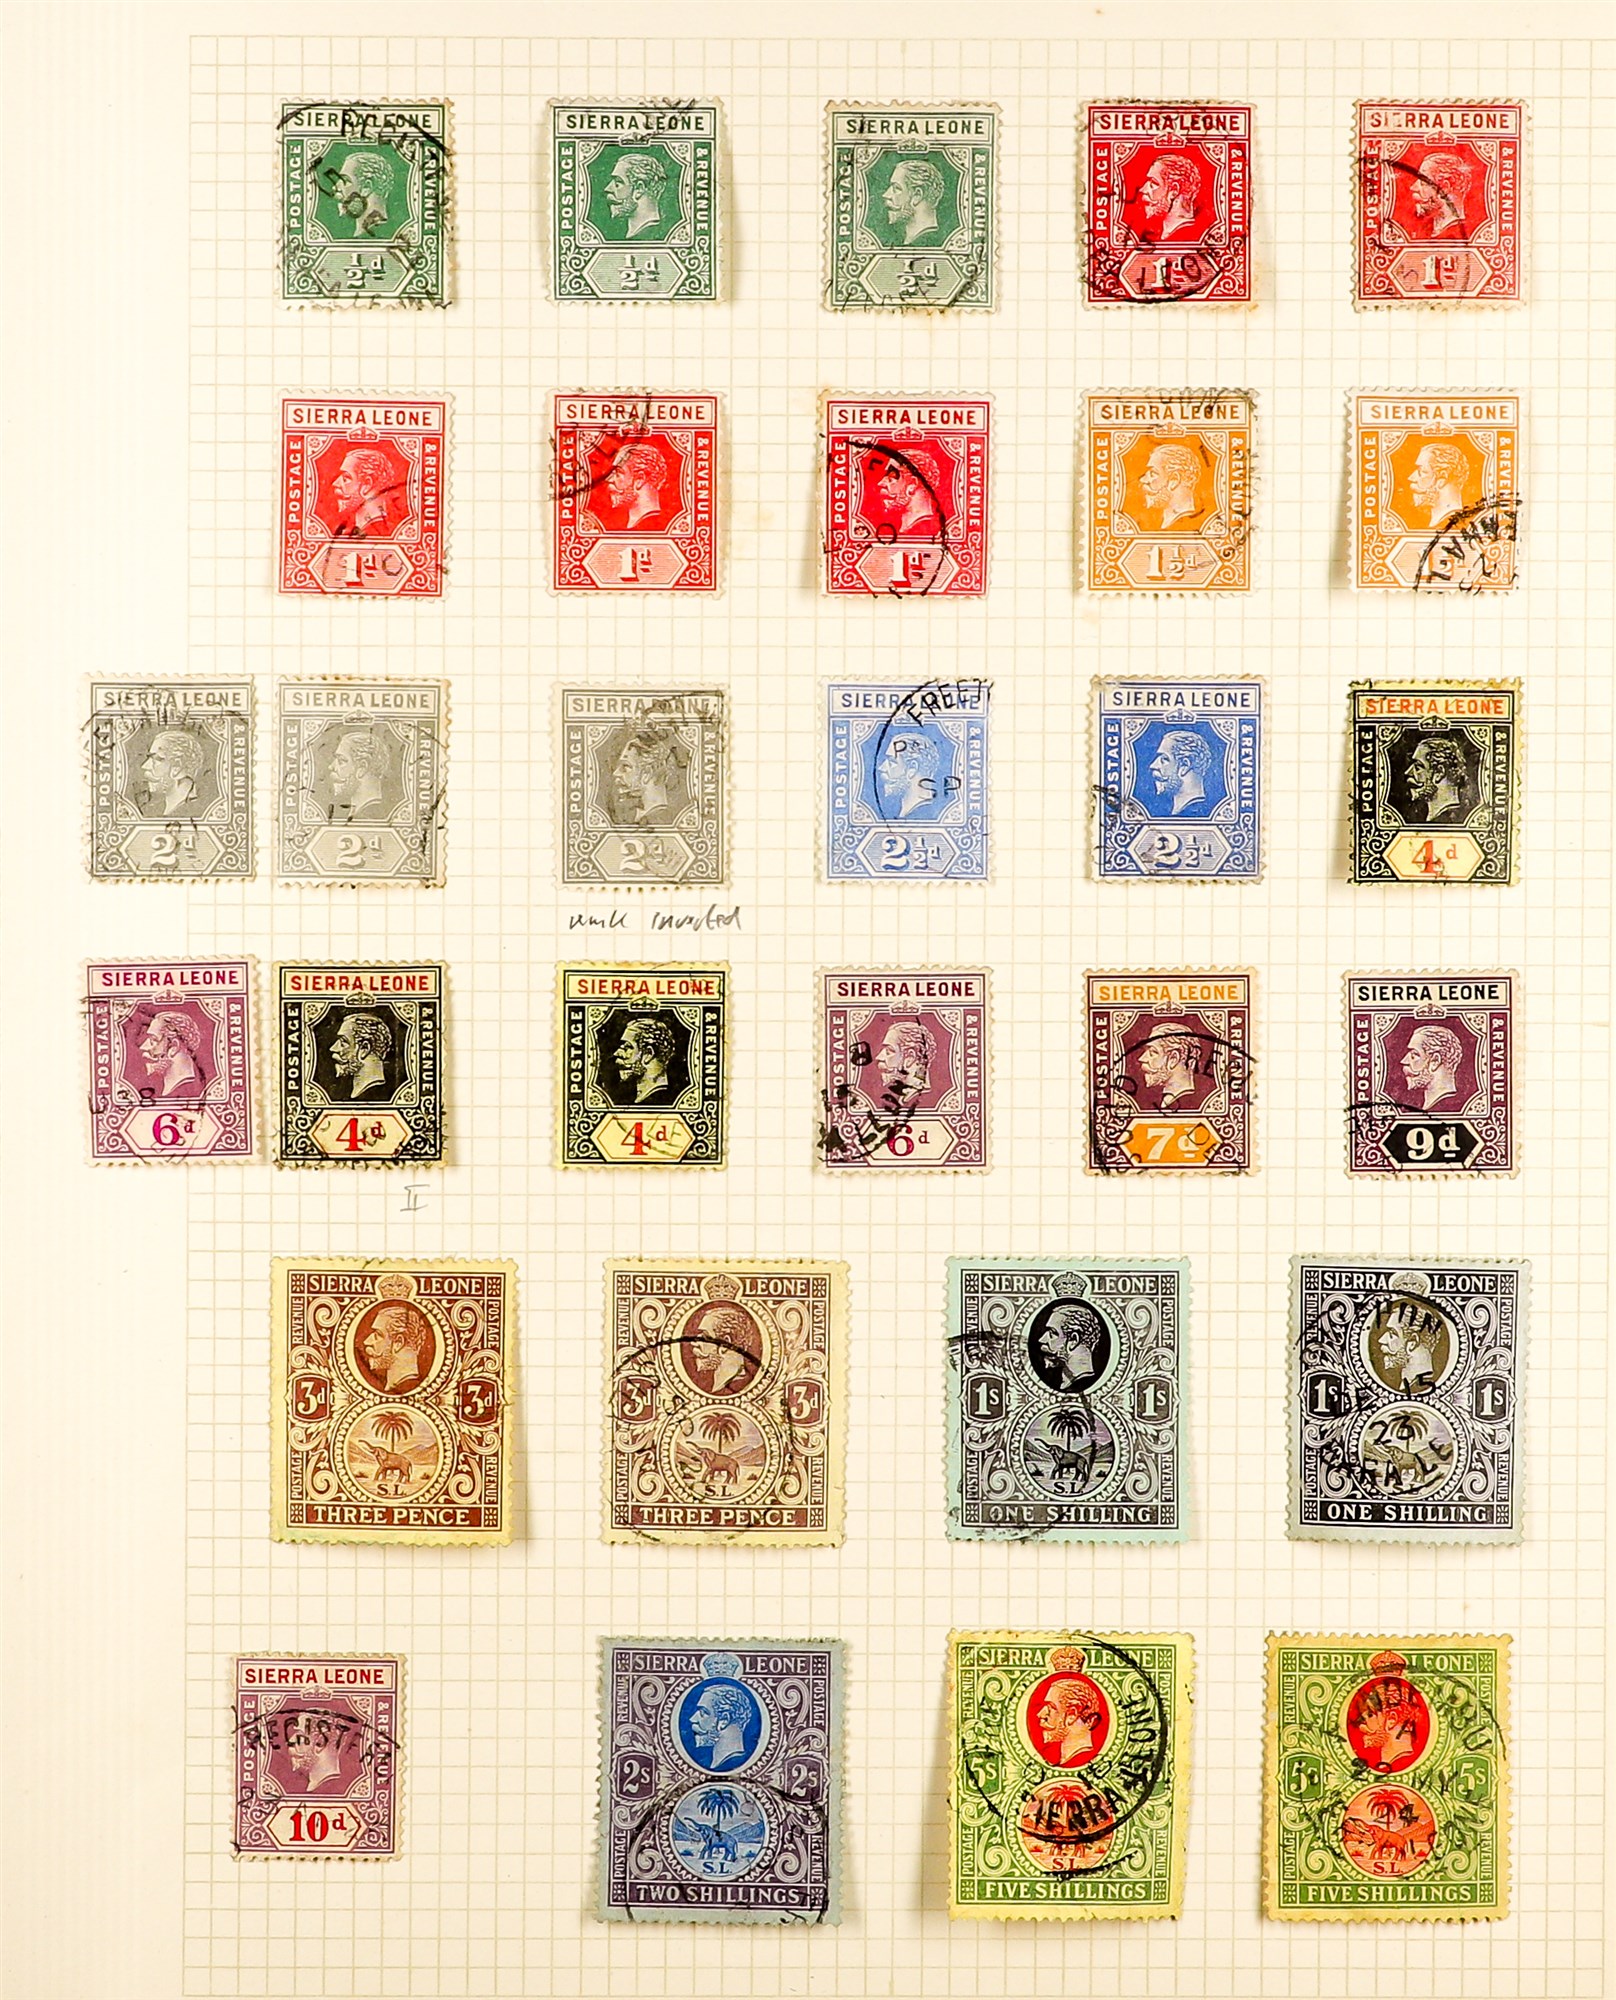 SIERRA LEONE 1912 - 1933 USED COLLECTION of 74 stamps on album pages, note 1912-21 to 5s (2,